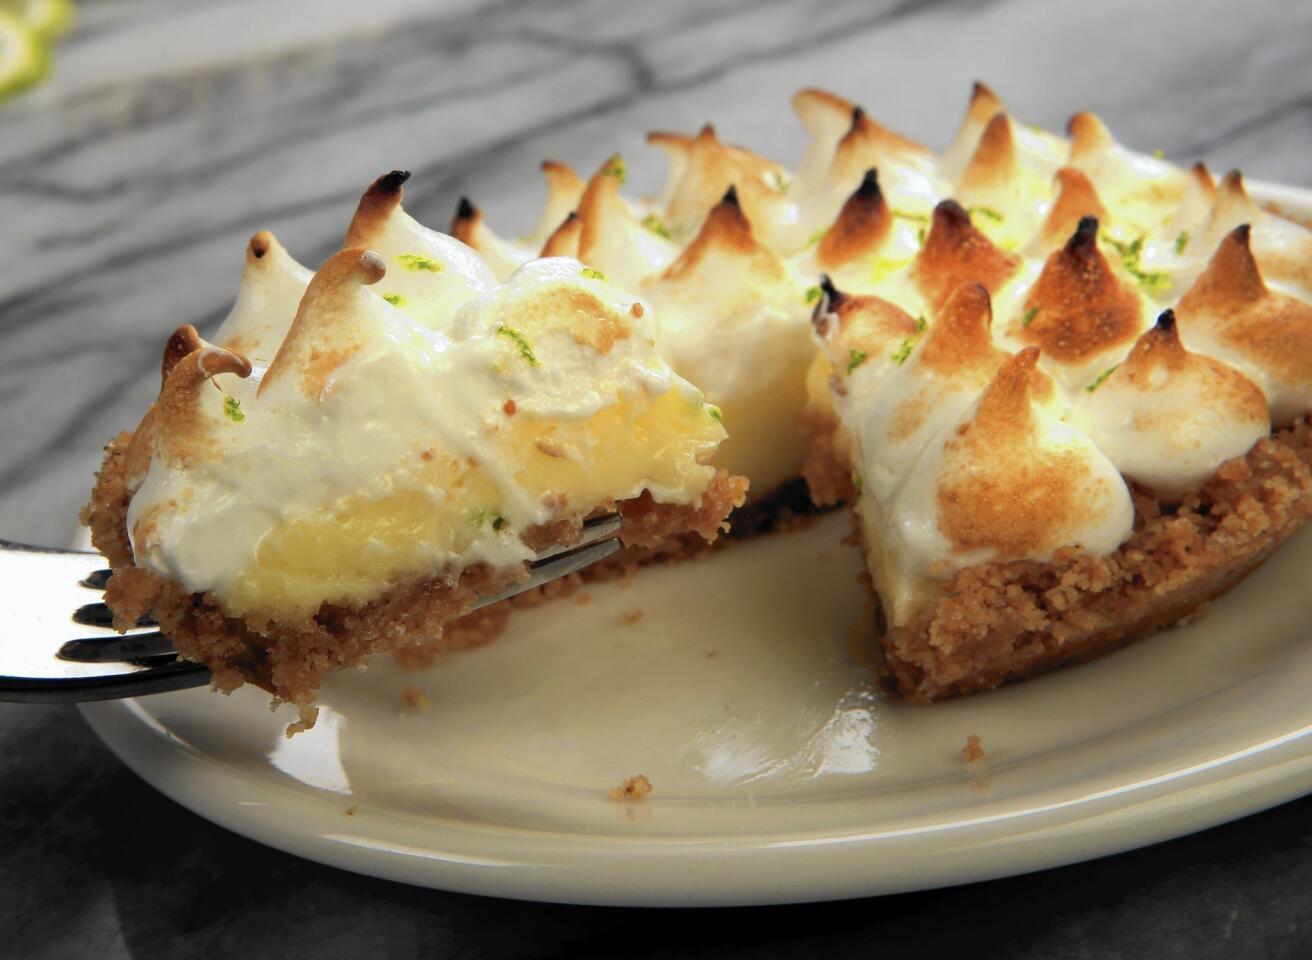 Fishing with Dynamite's Key lime pies